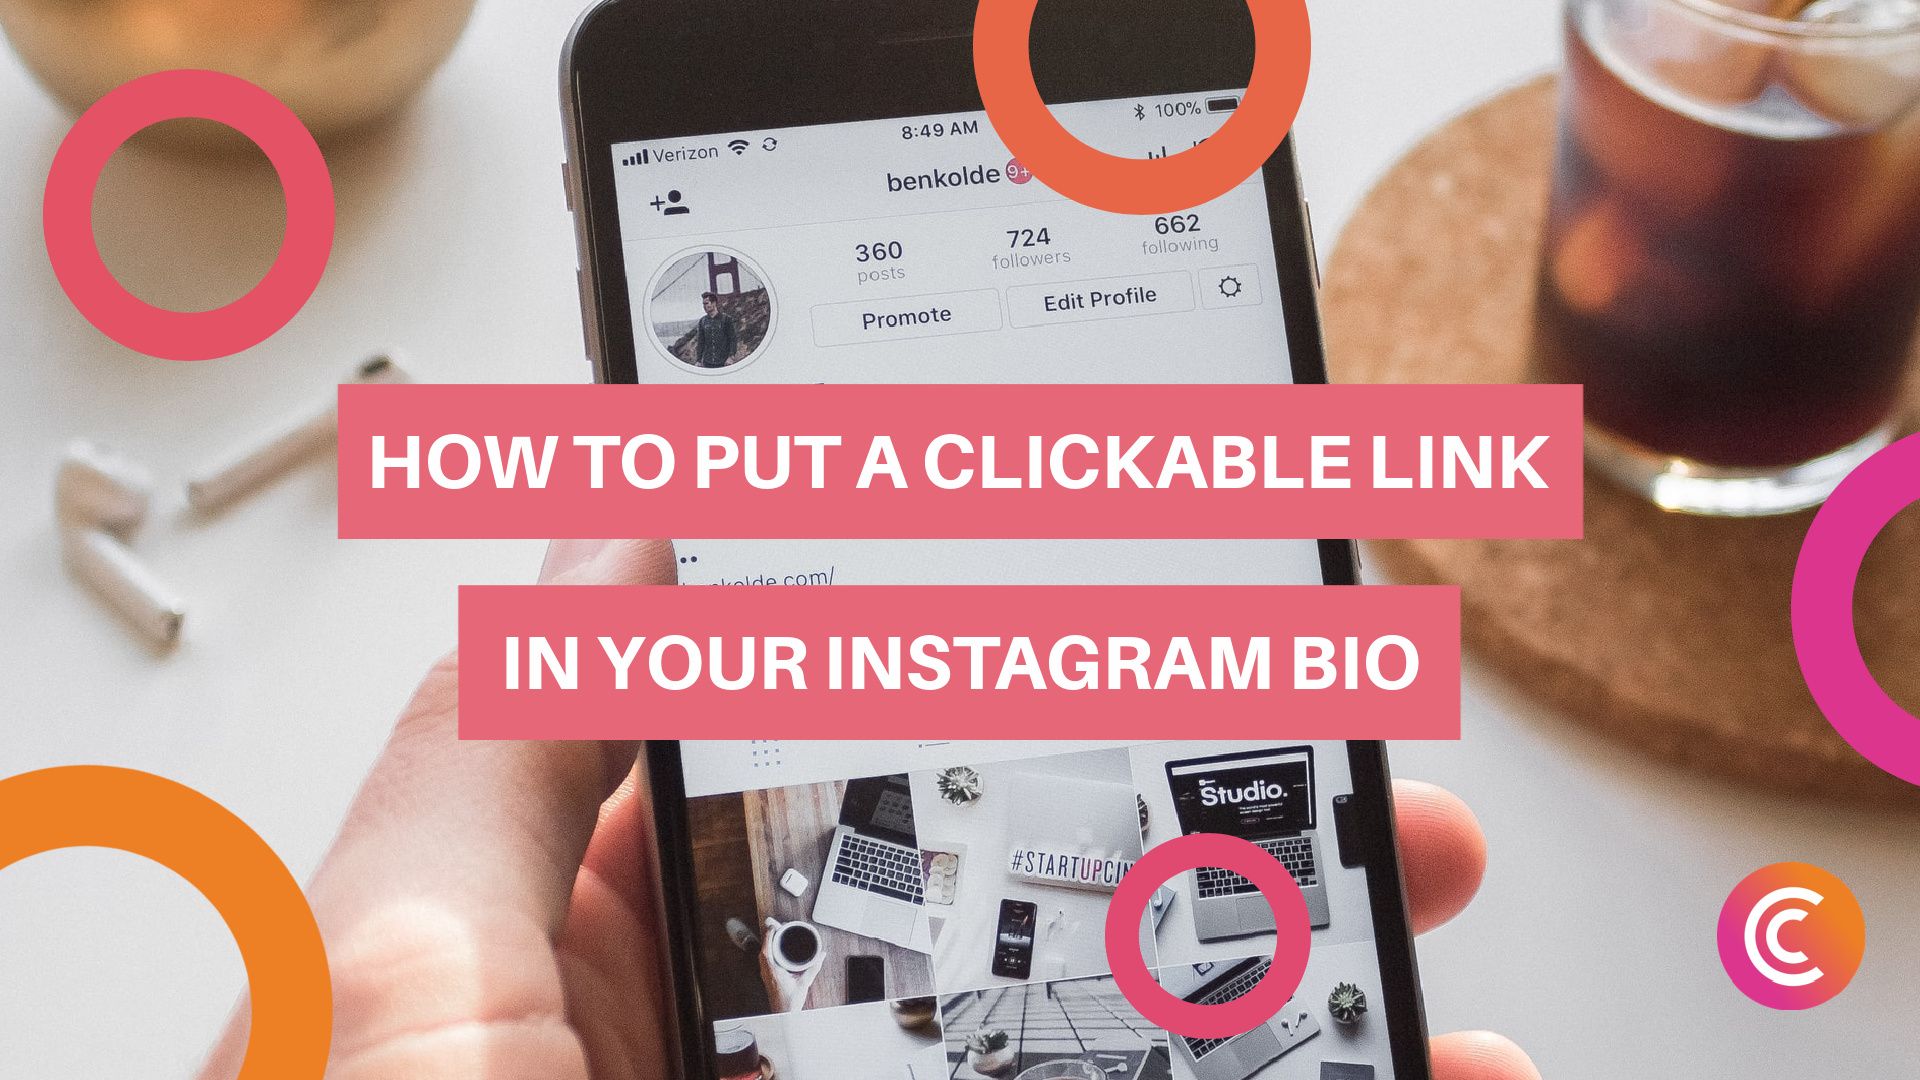 How To Put A Clickable Link In Your Instagram Bio